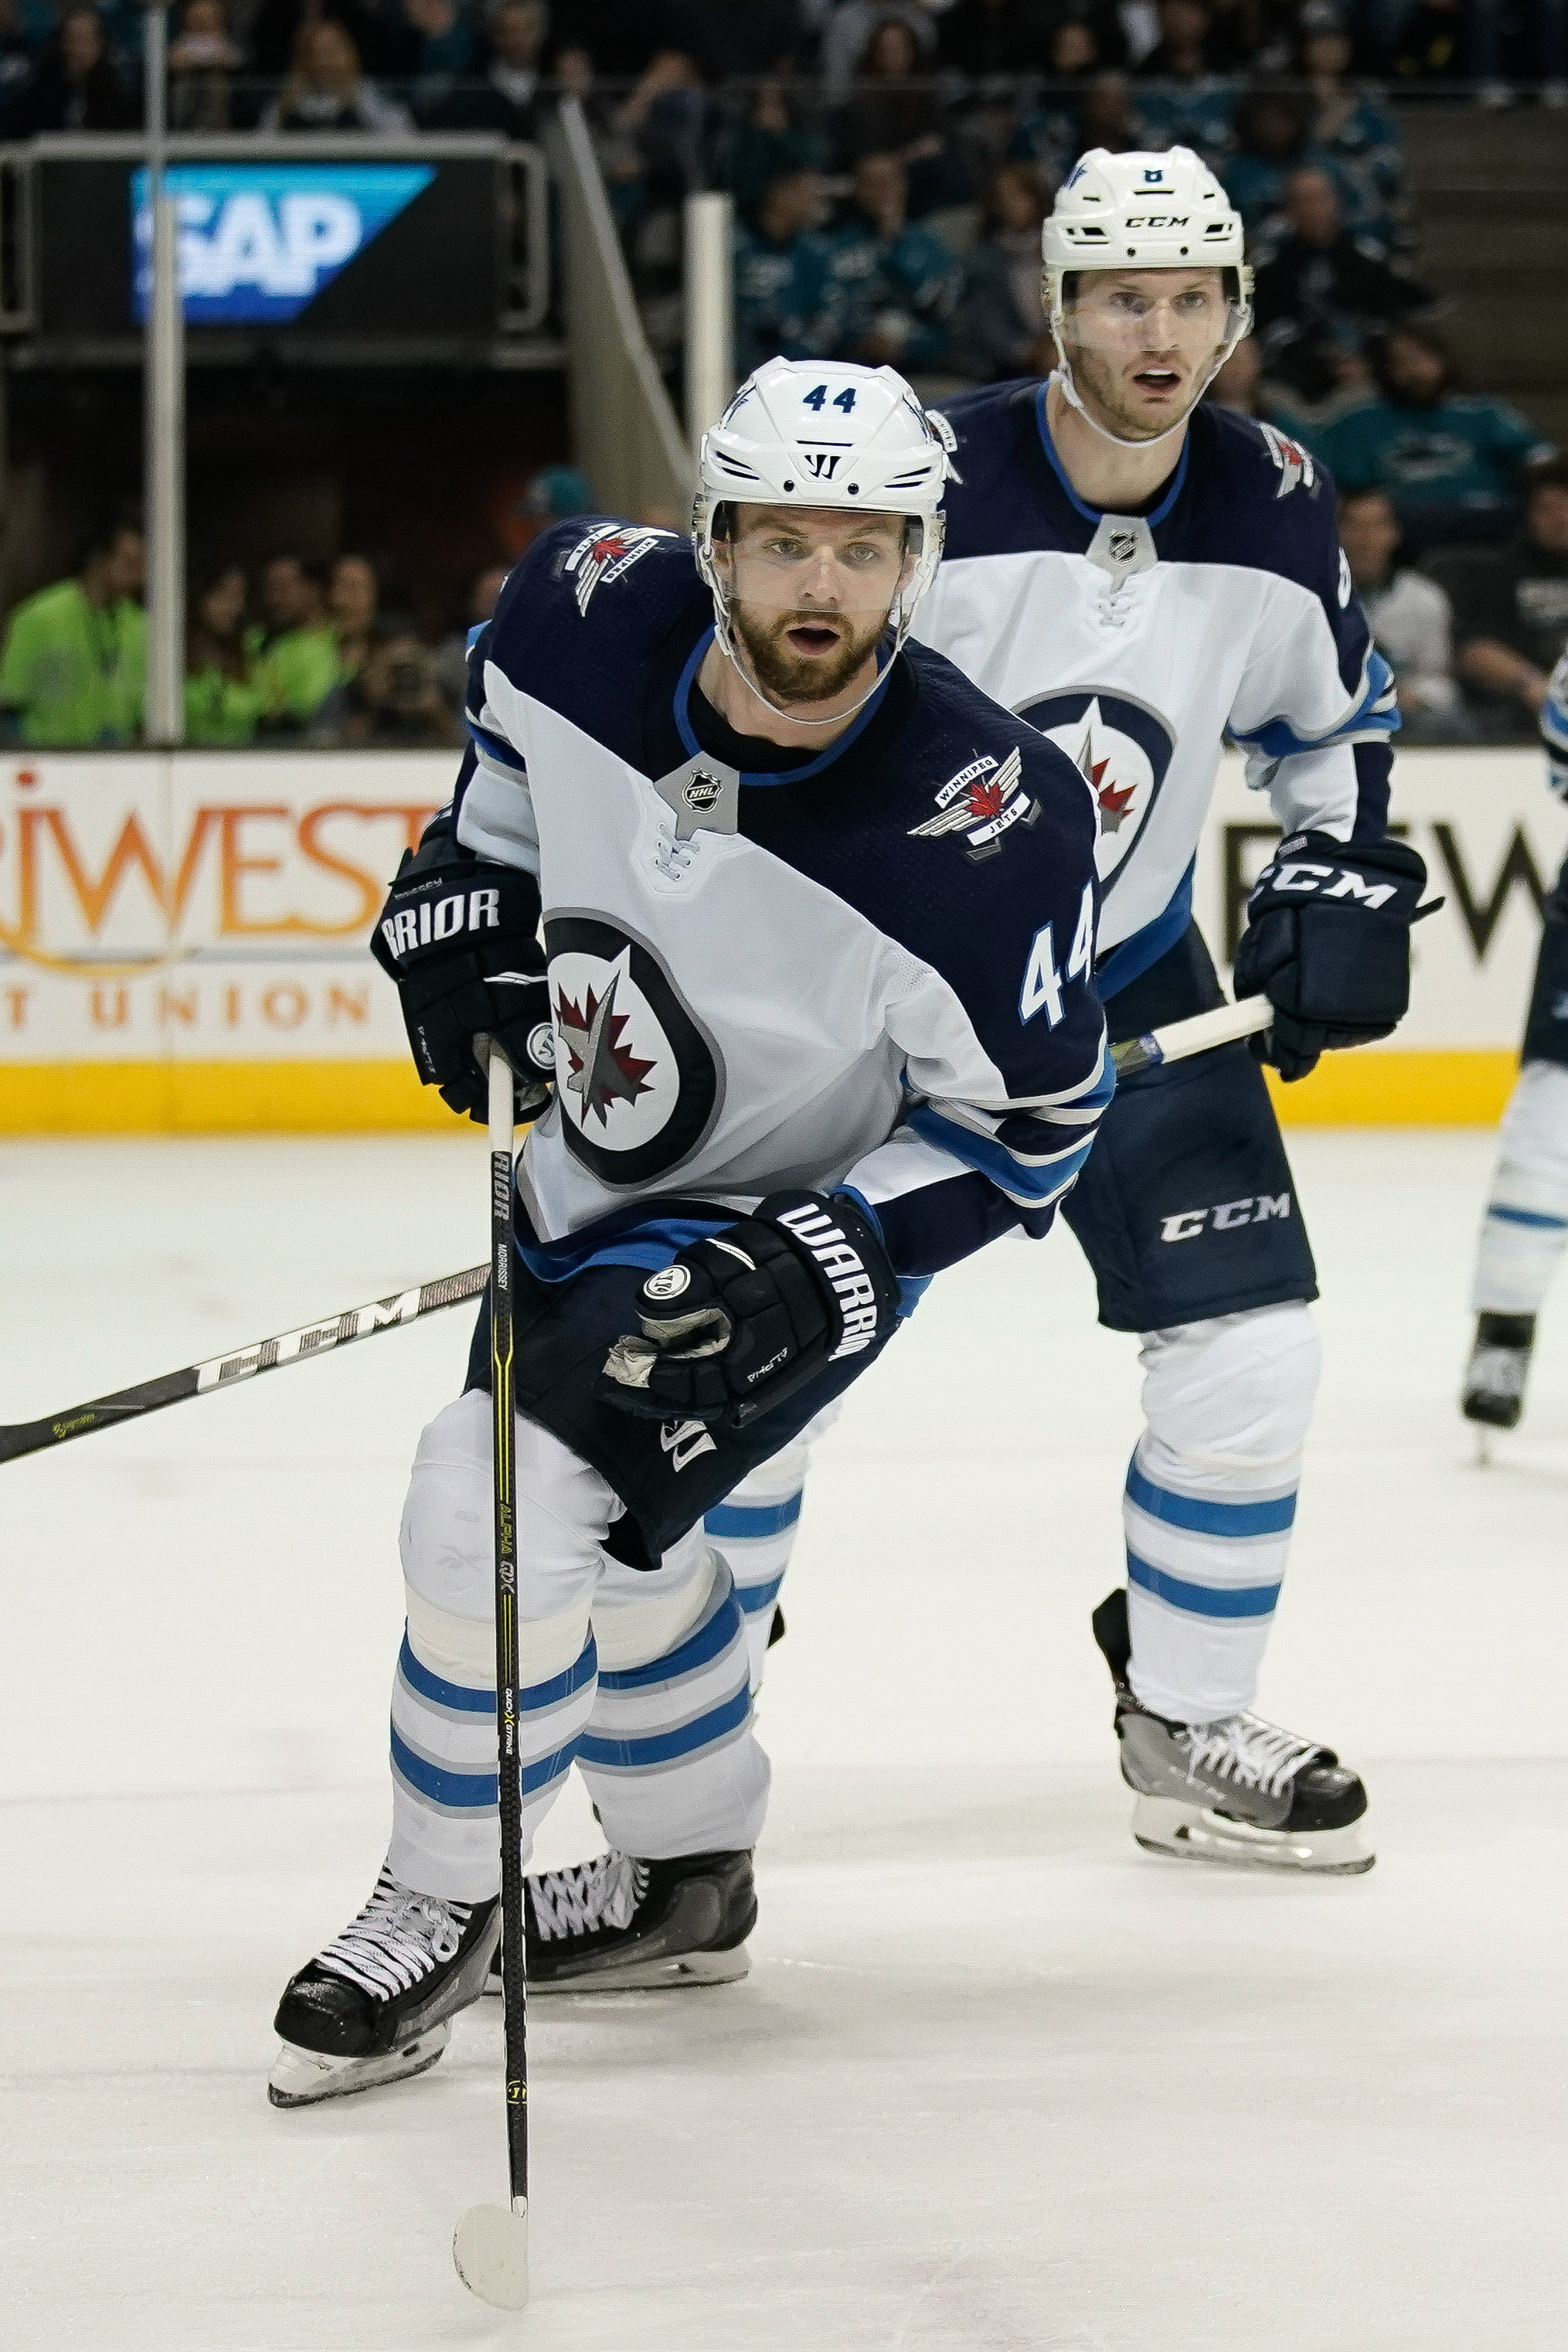 Could Blake Wheeler Have Issues Playing Under Jacob Trouba?